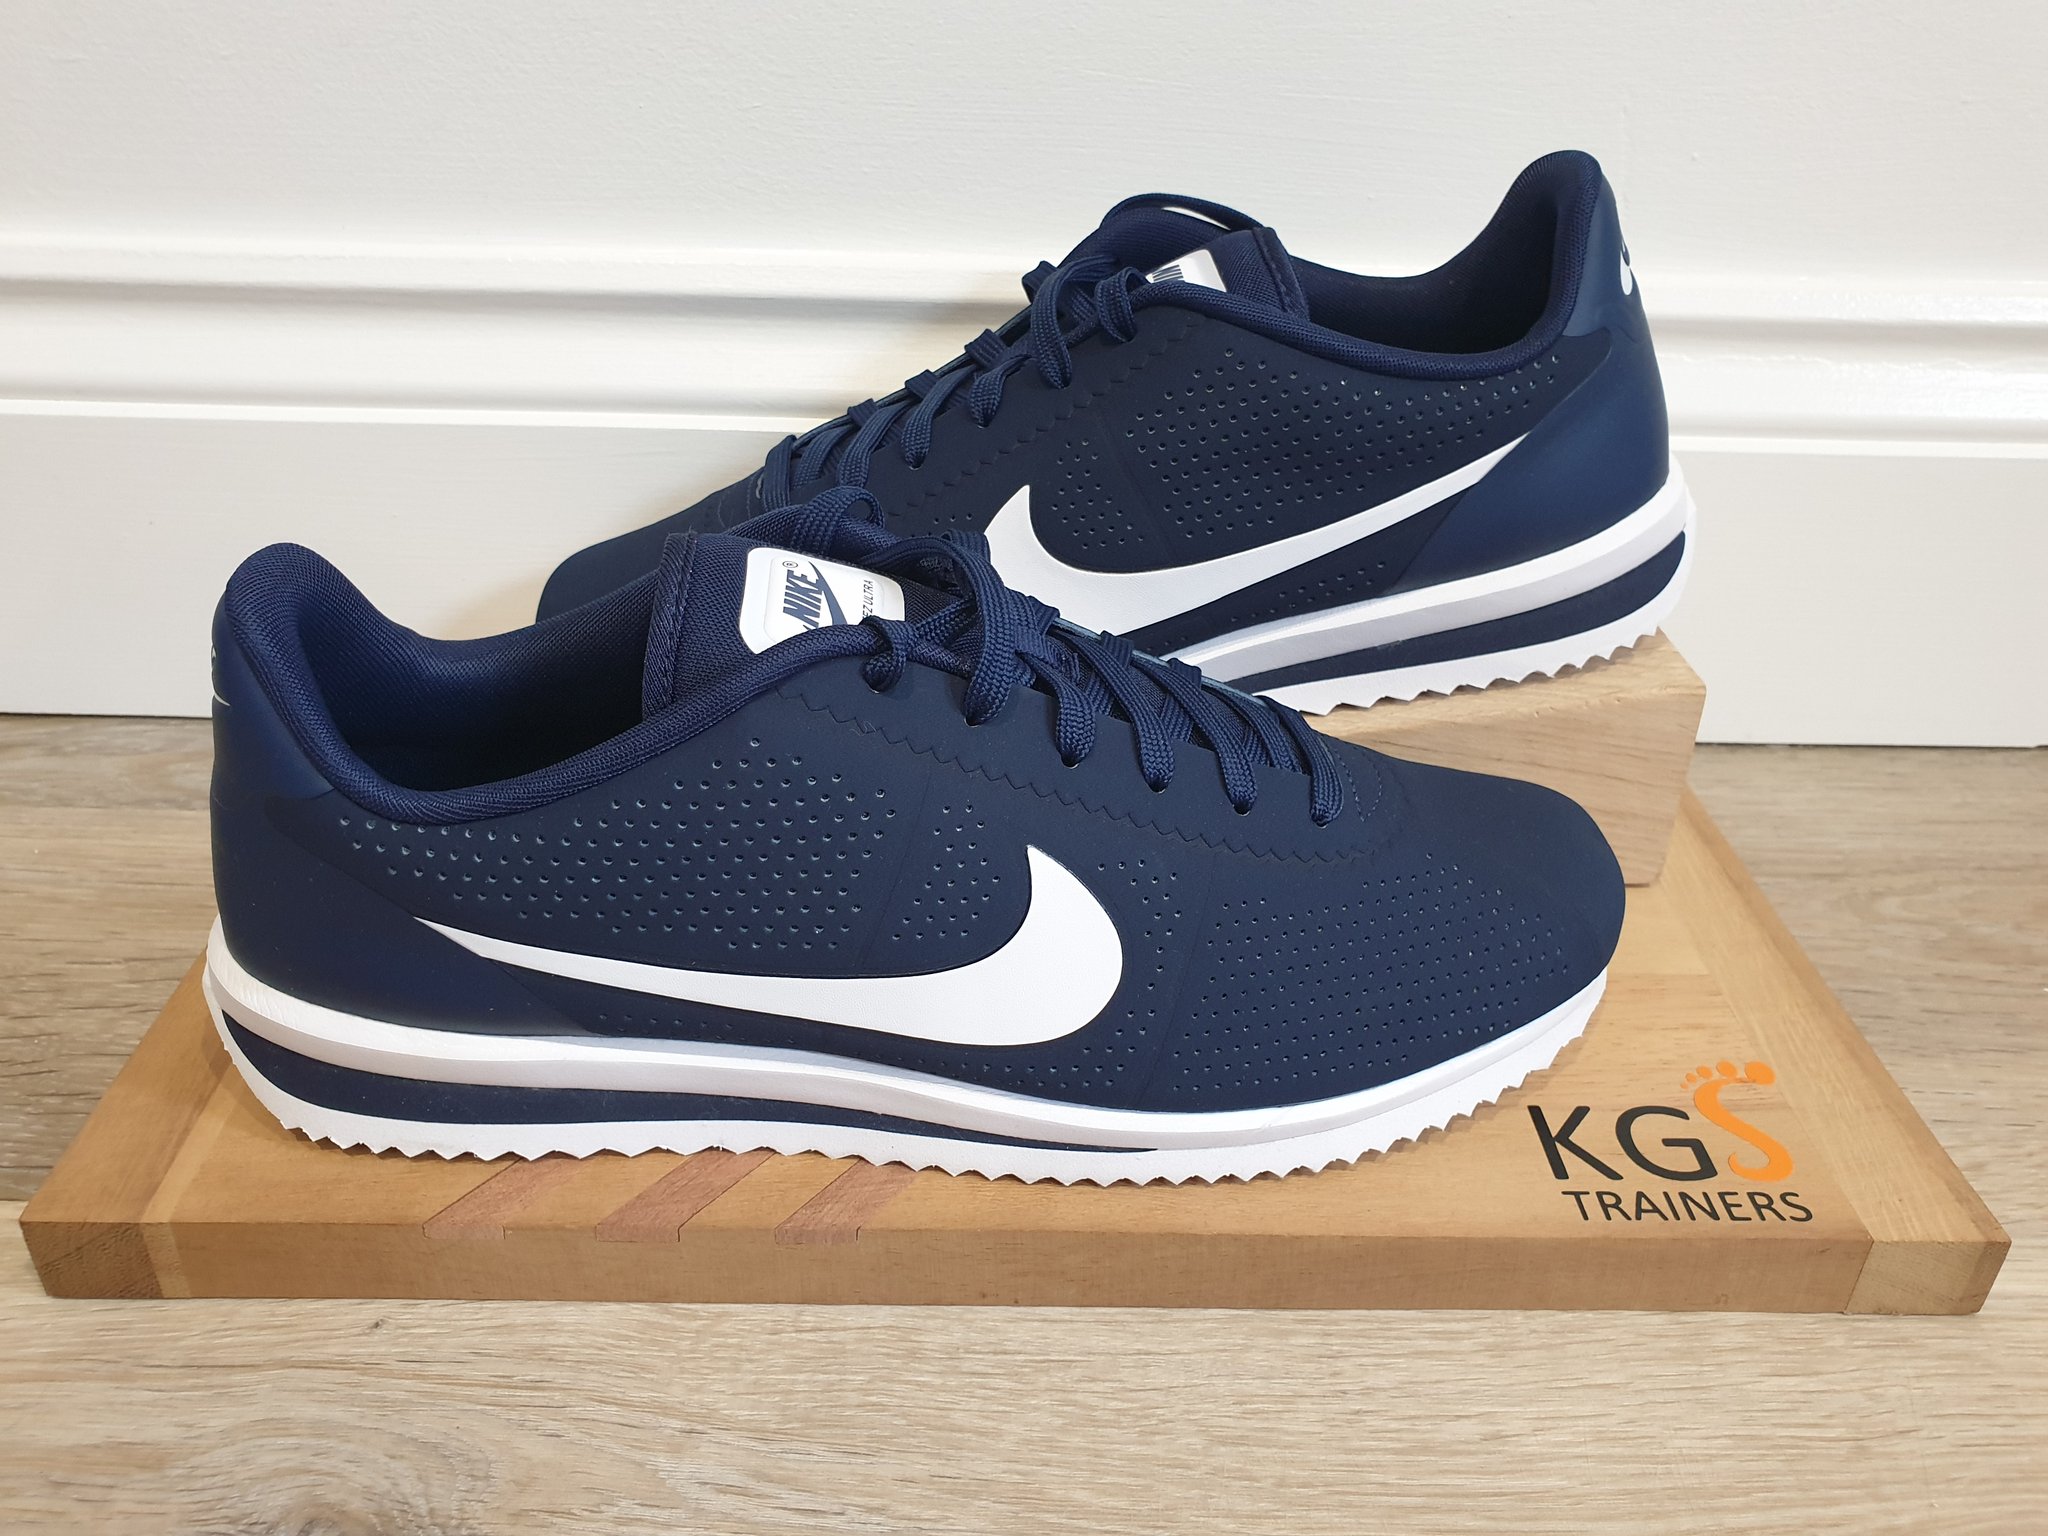 Twee graden Duplicatie Vooraf KGS Trainers on Twitter: "Nike cortez ultra moire Size 10 UK only BNIB. £65  delivered. DM to purchase #nike #cortez #moire #trainers #sneakers #size10  https://t.co/74vRu0rndI" / Twitter